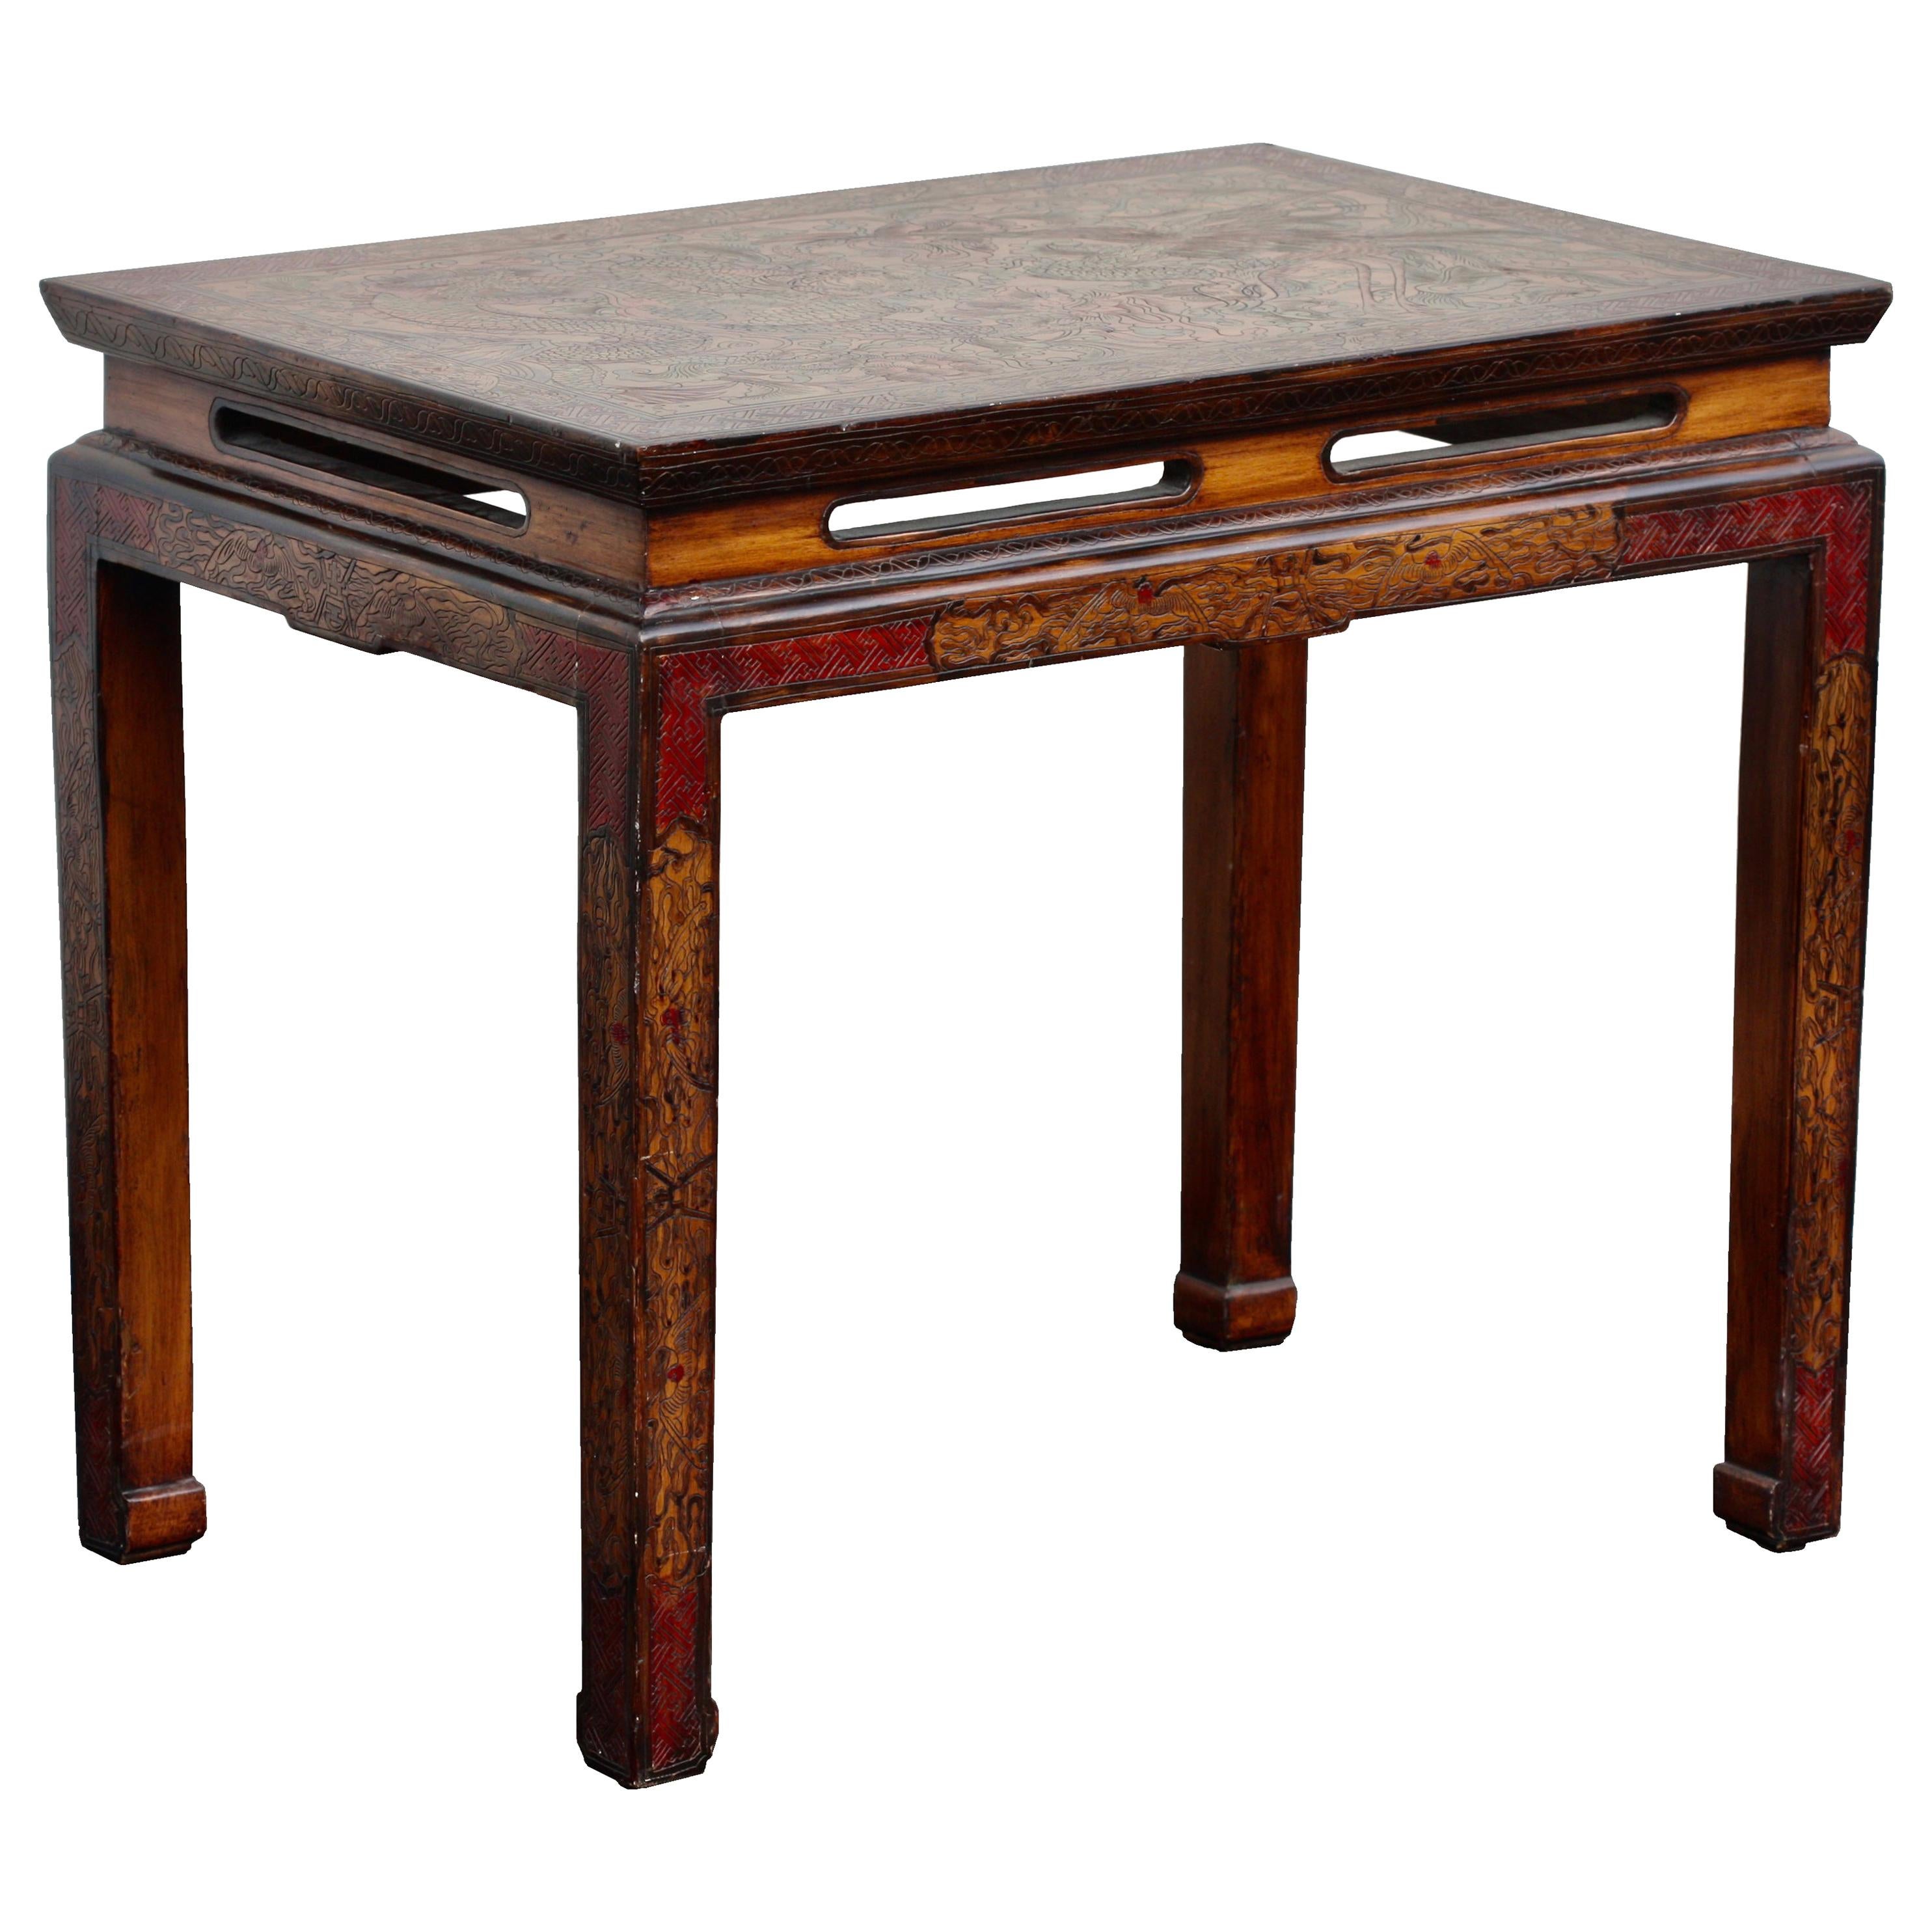 Huanghuali Style Table, Chinese, Qing Dynasty, 19th Century